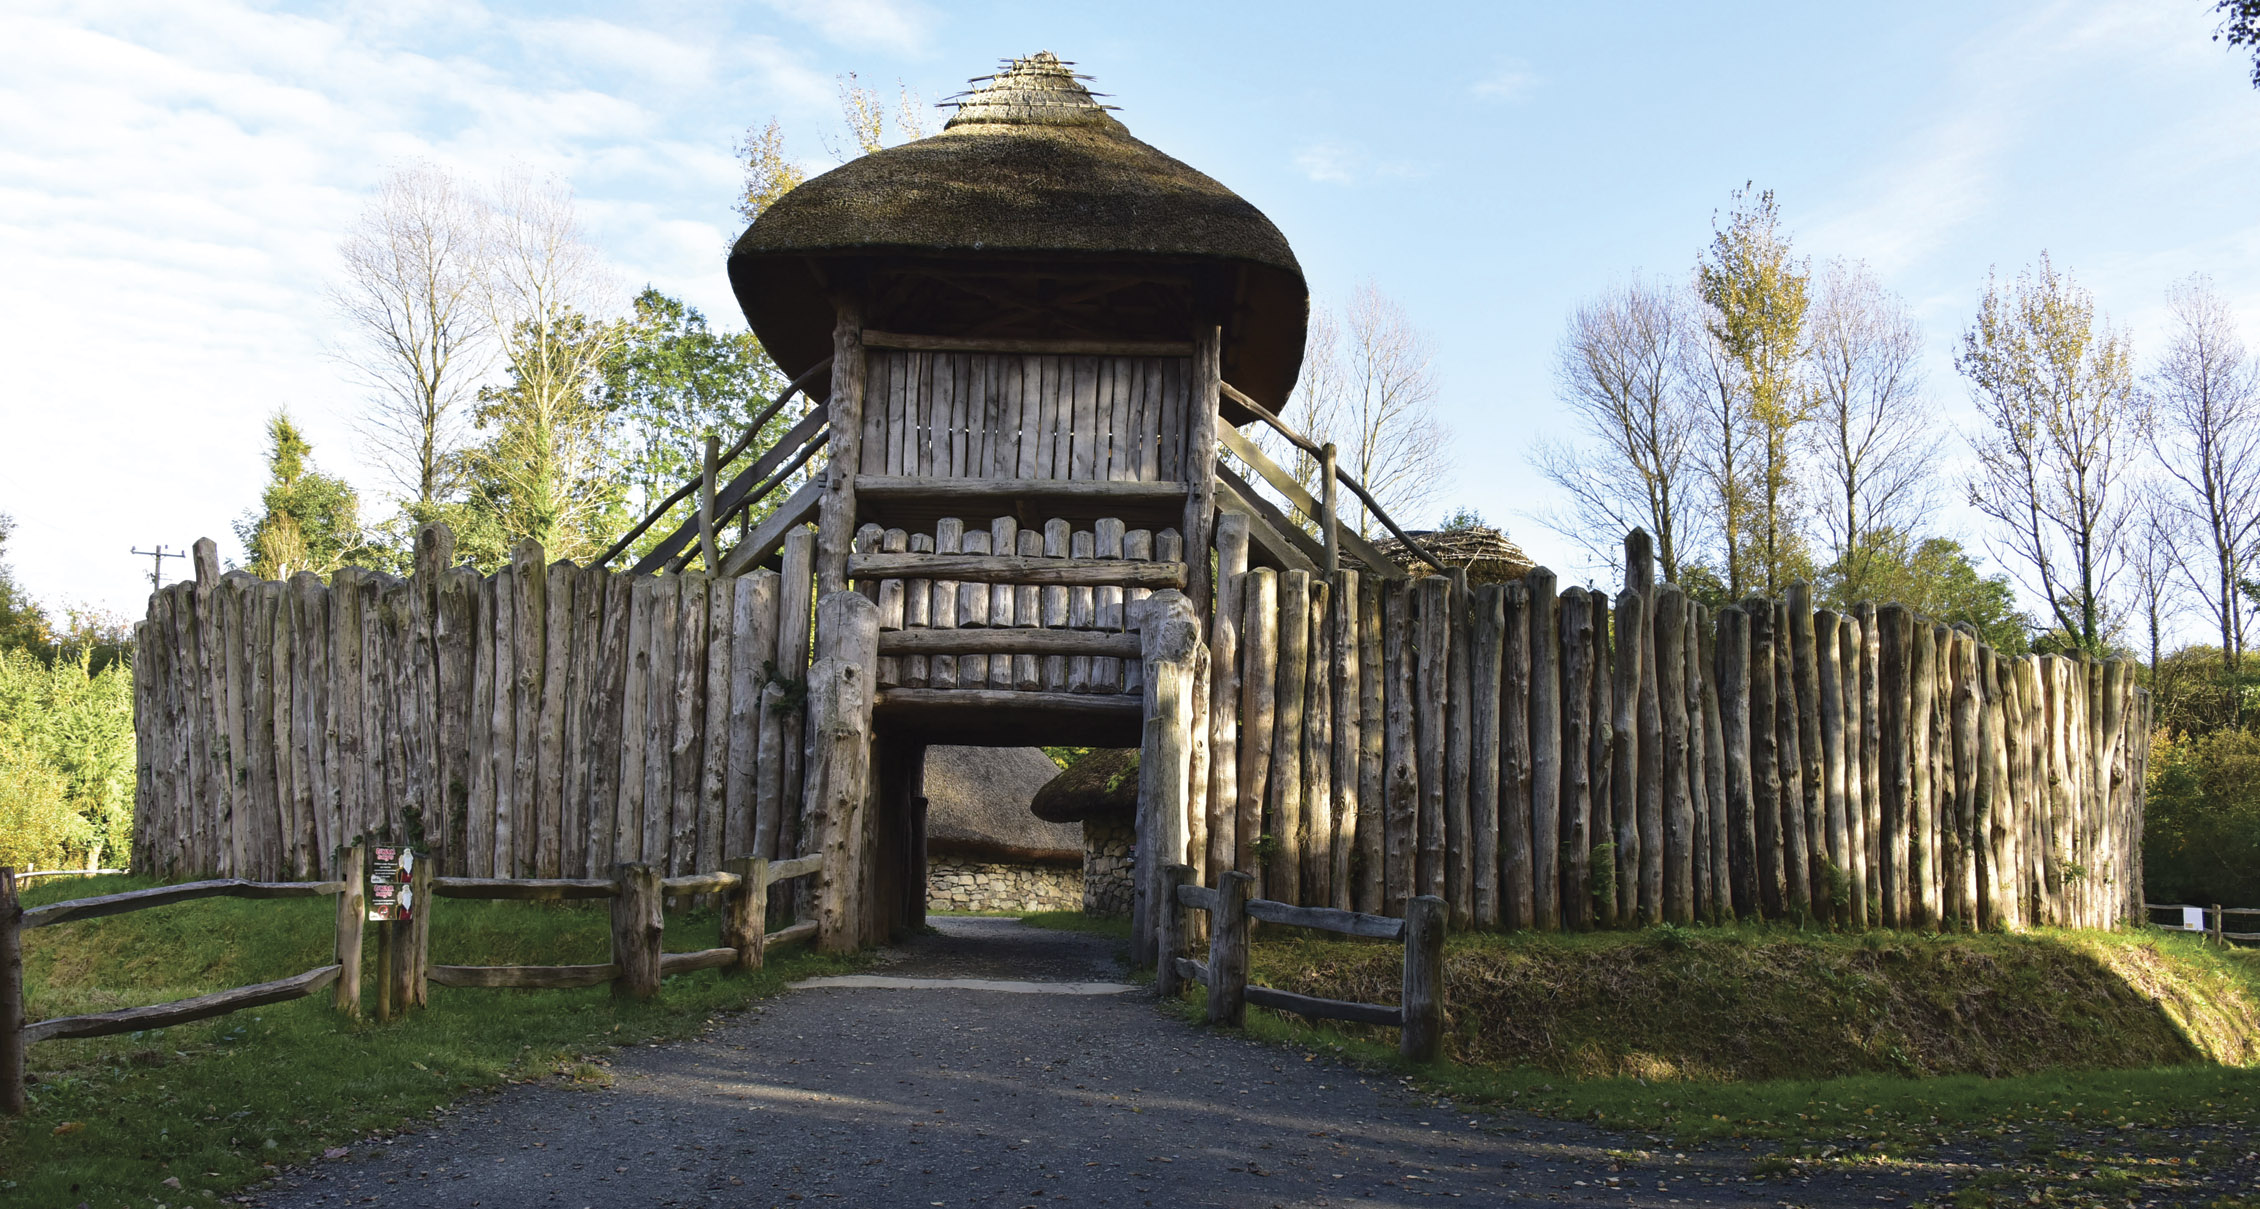 A replica of a 1,500-year-old Irish ringfort, where you can stay overnight and live as your long-ago ancestors did, situated in Wexford’s Irish National Heritage Park.